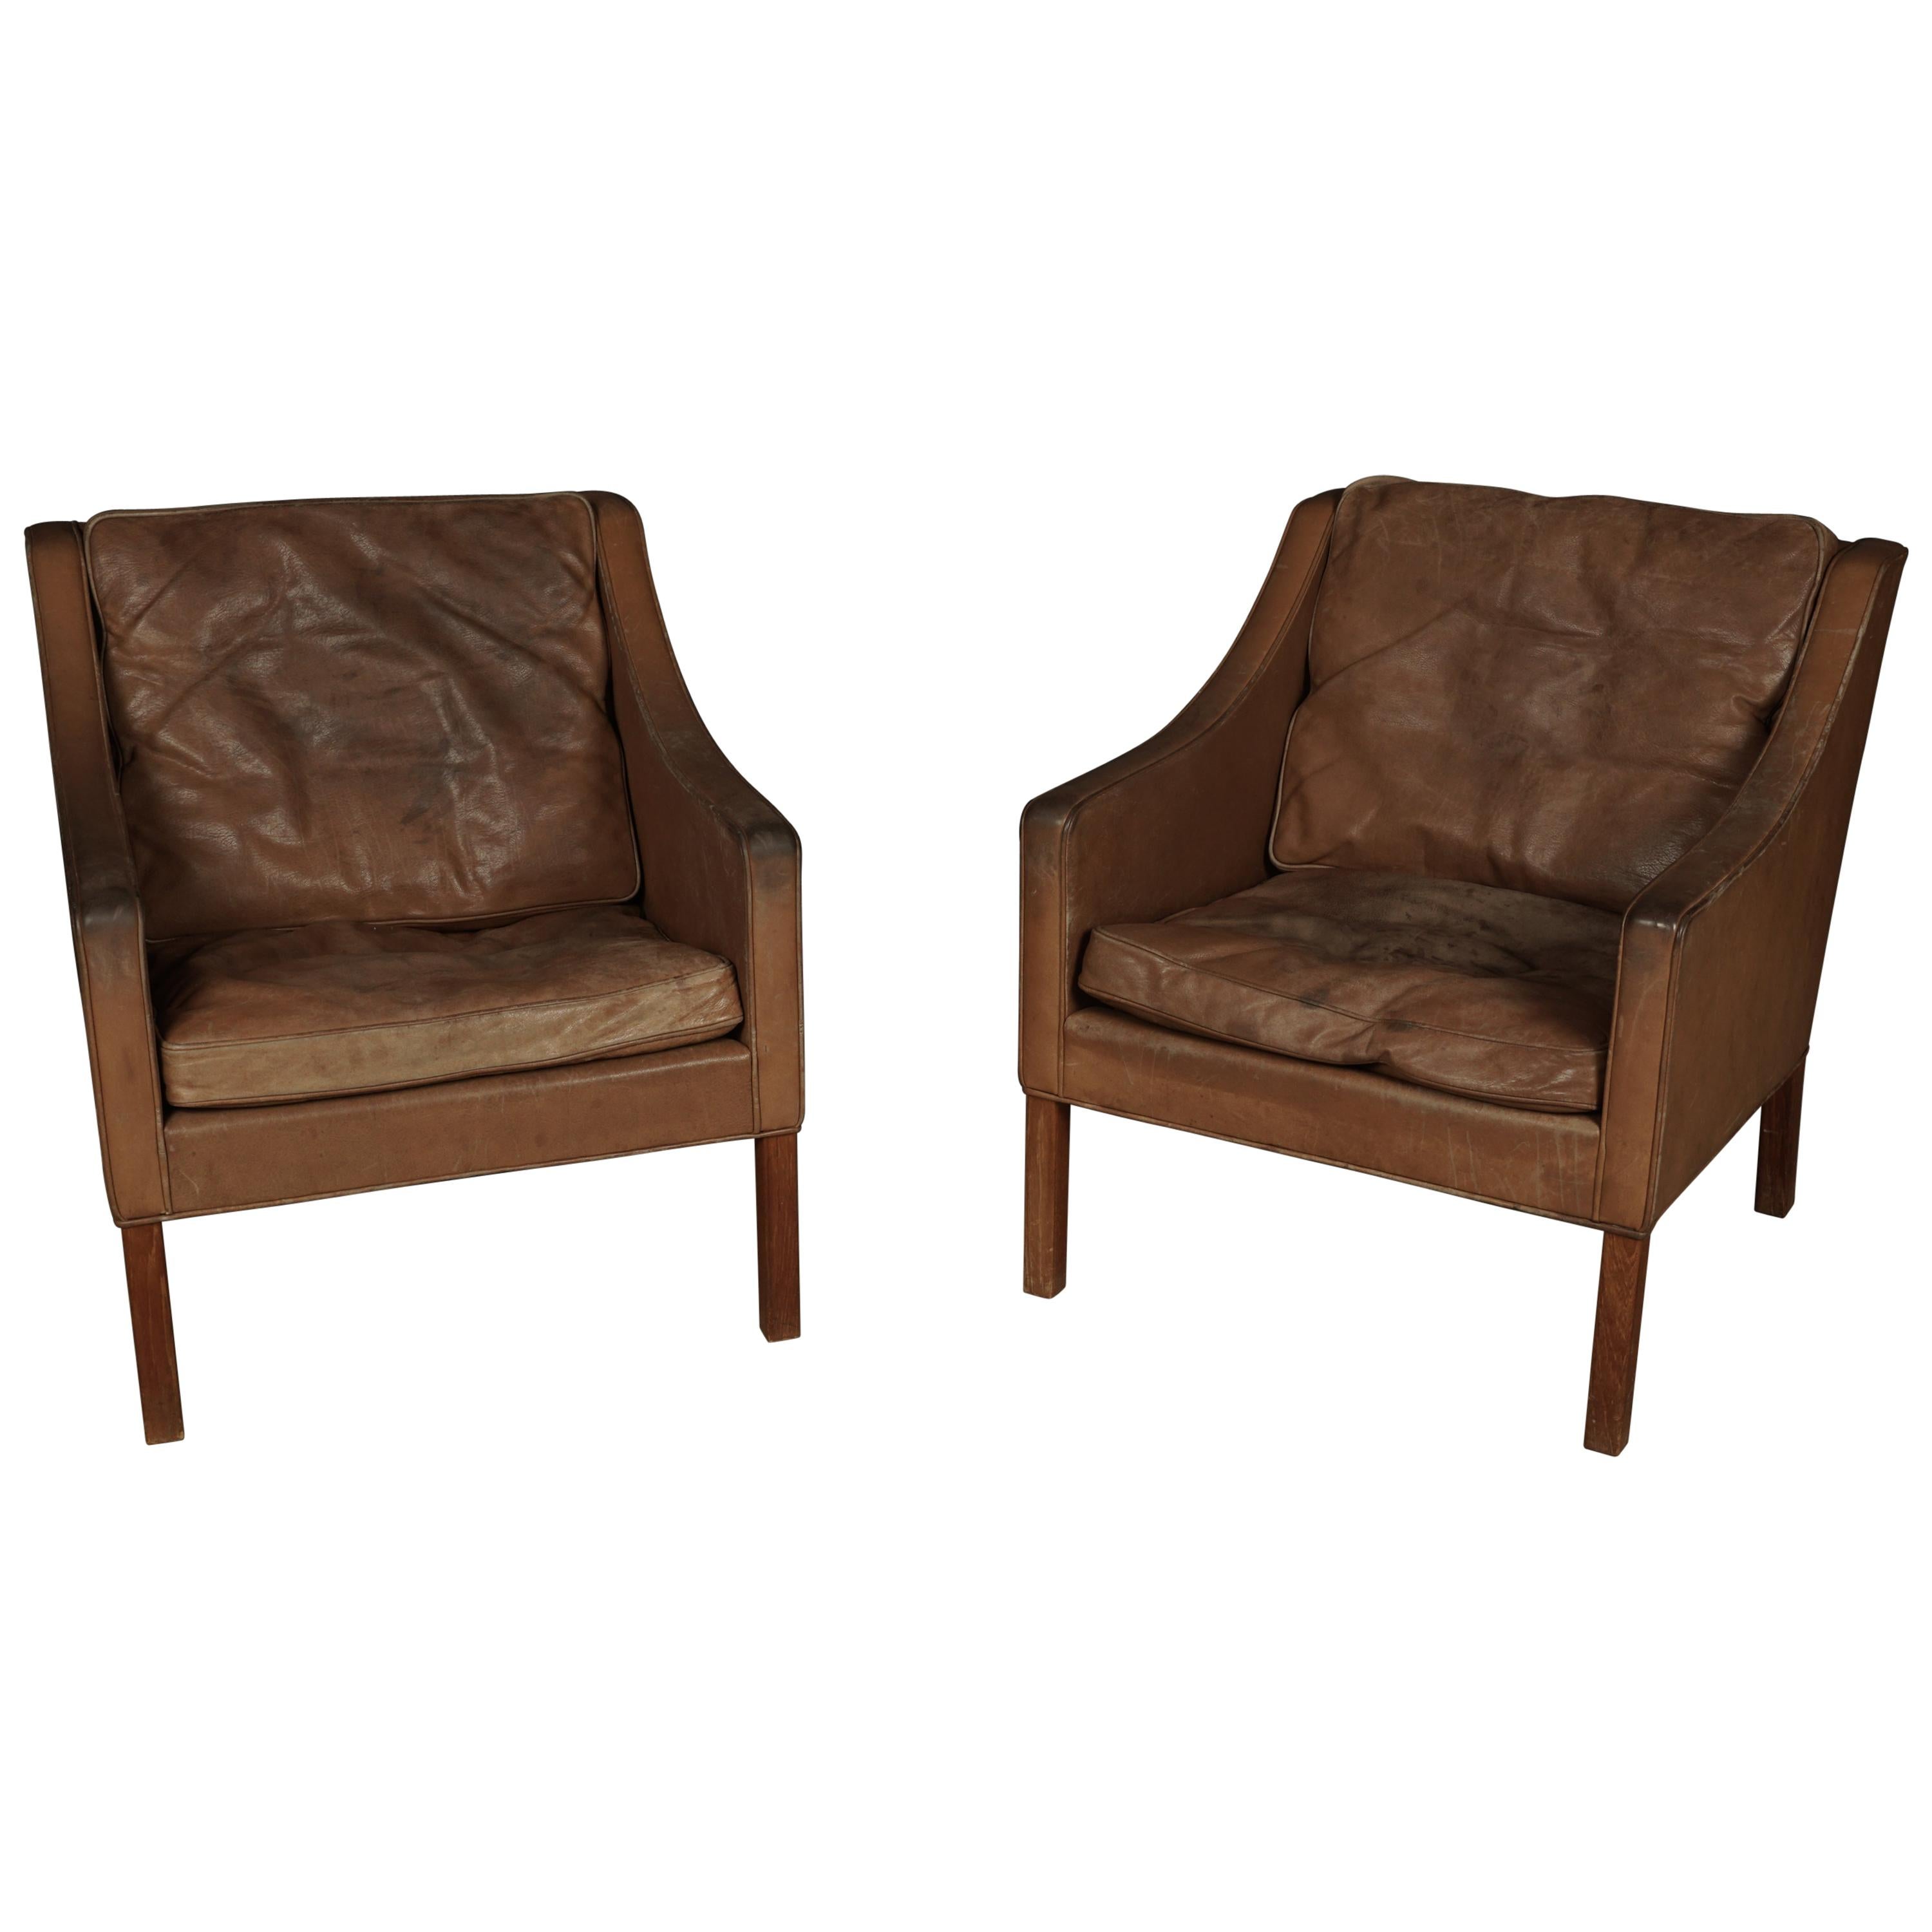 Pair of Borge Mogensen Lounge Chairs from Denmark, circa 1970